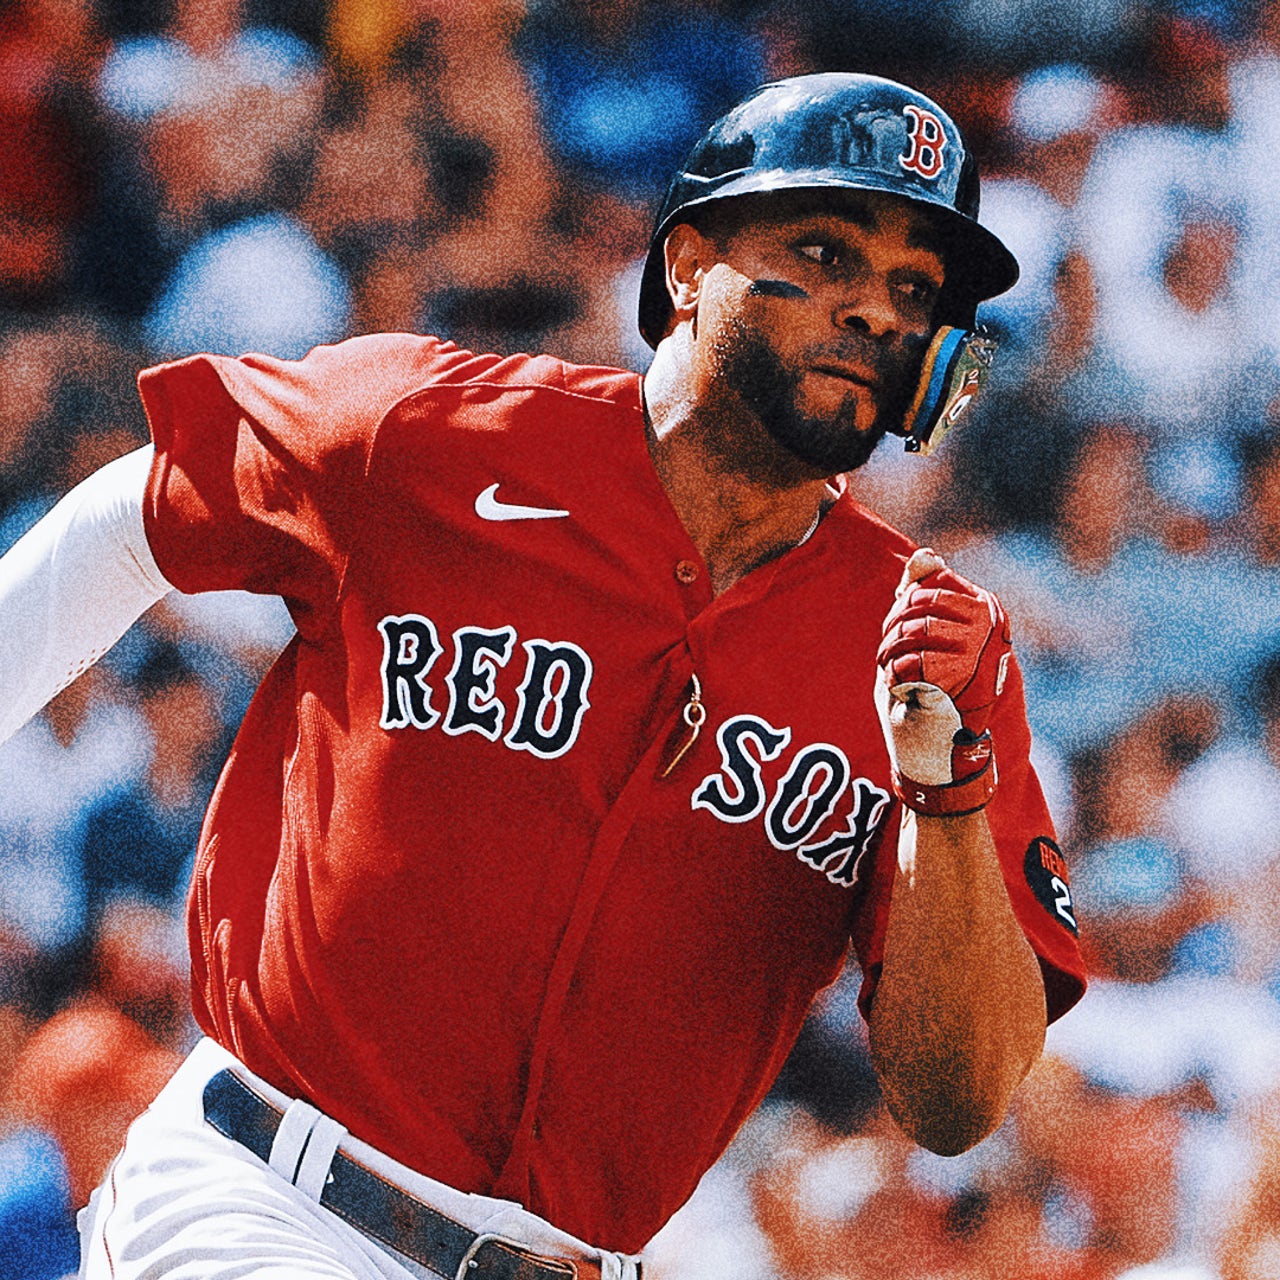 San Diego Padres reportedly sign Xander Bogaerts to 11-year contract